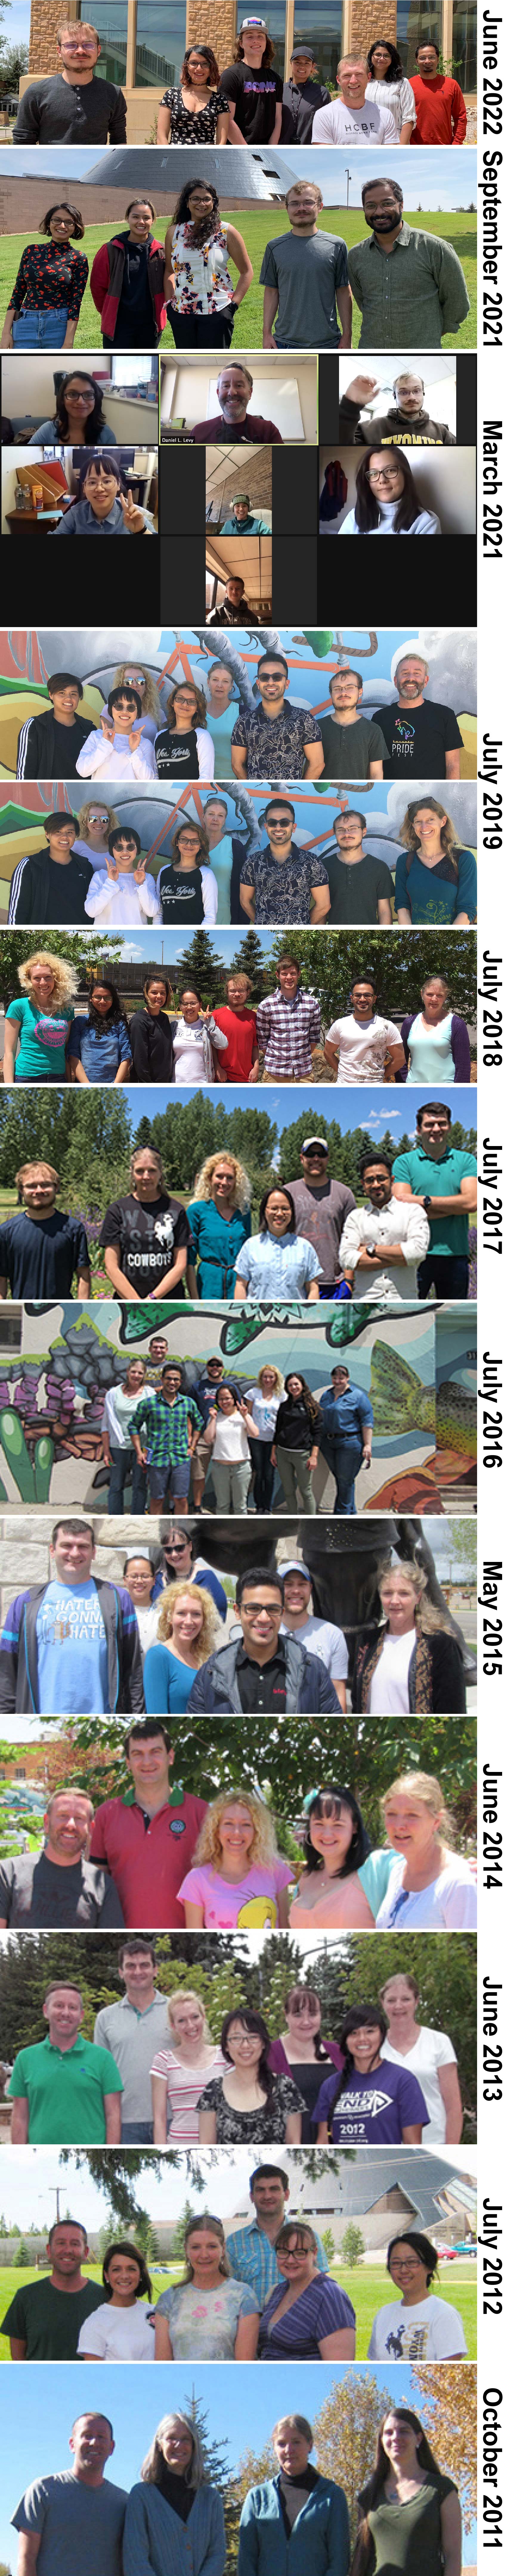 Group photos from 2011 to 2022